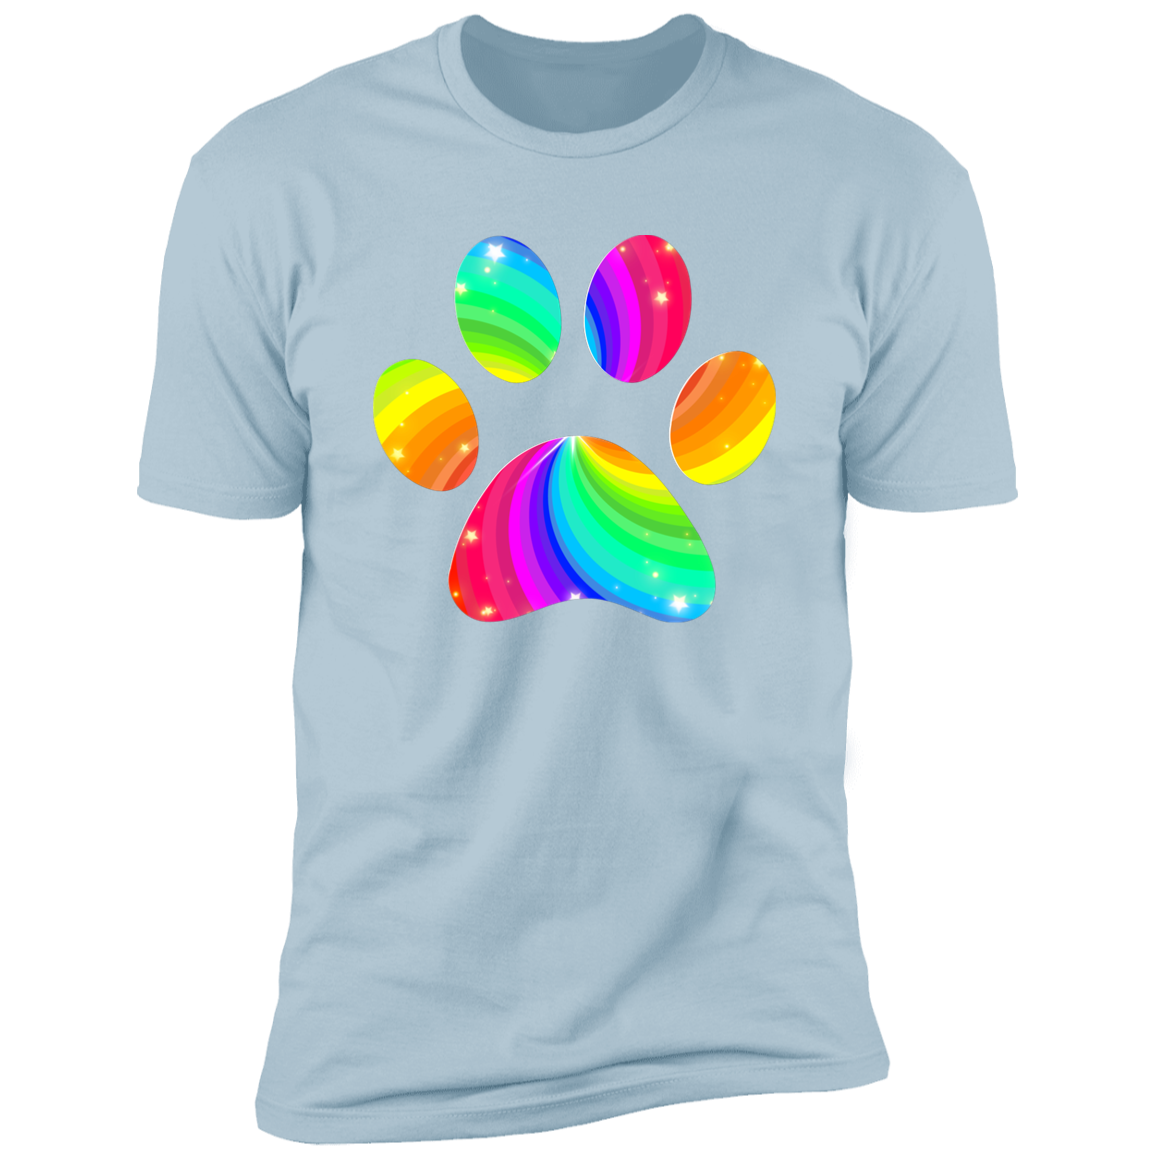 Pride Paw 2023 (Flag) Pride T-shirt, Paw Pride Dog Shirt for humans, in light blue